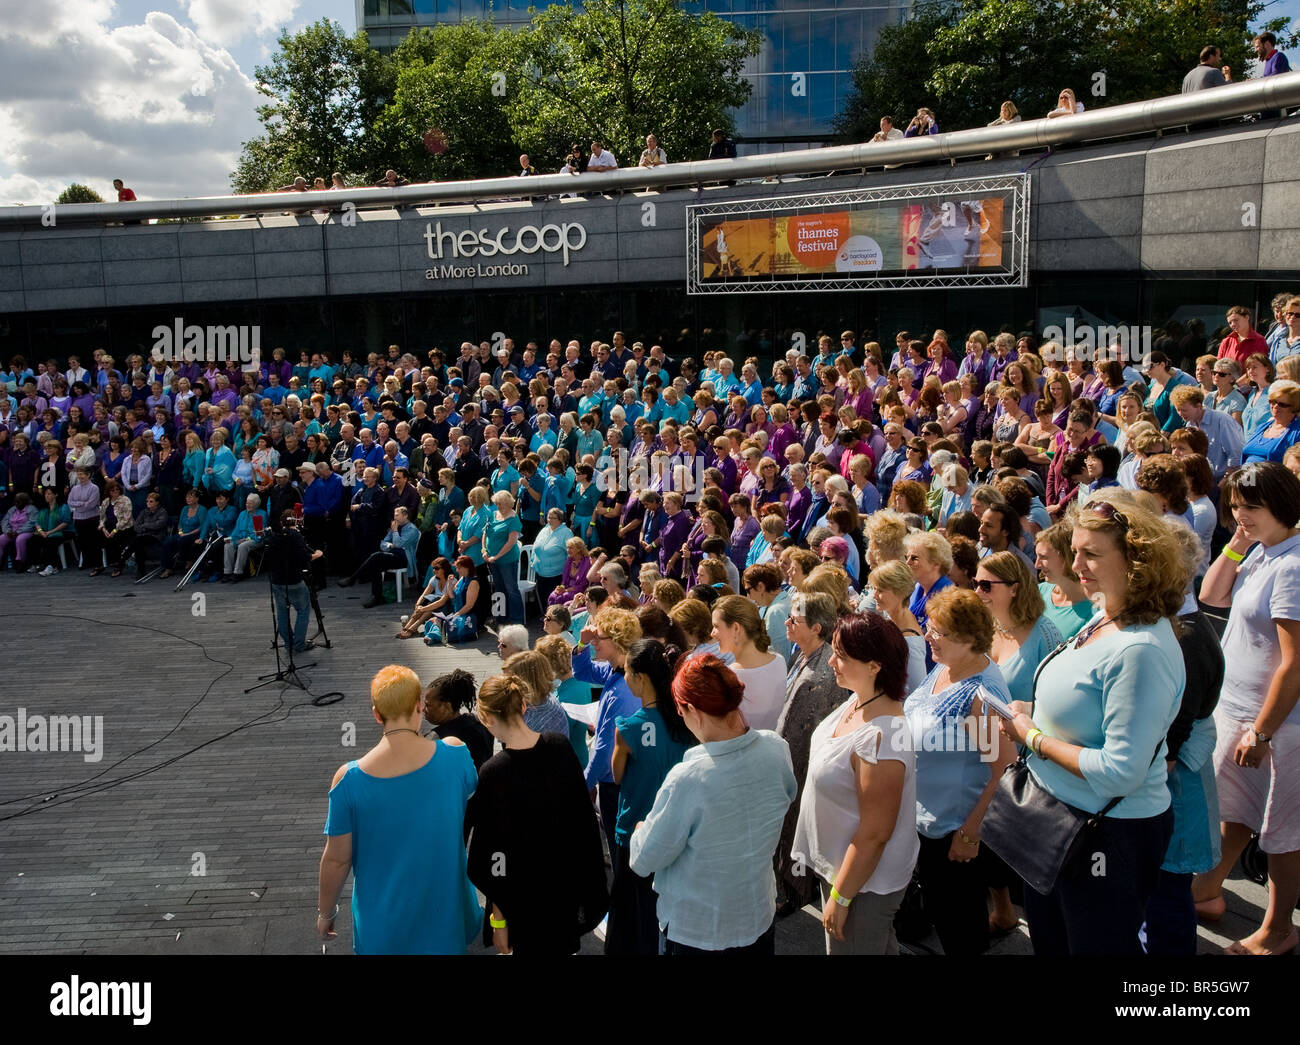 A massed choir singing in the Scoop as part of the Thames Festival in London. Stock Photo